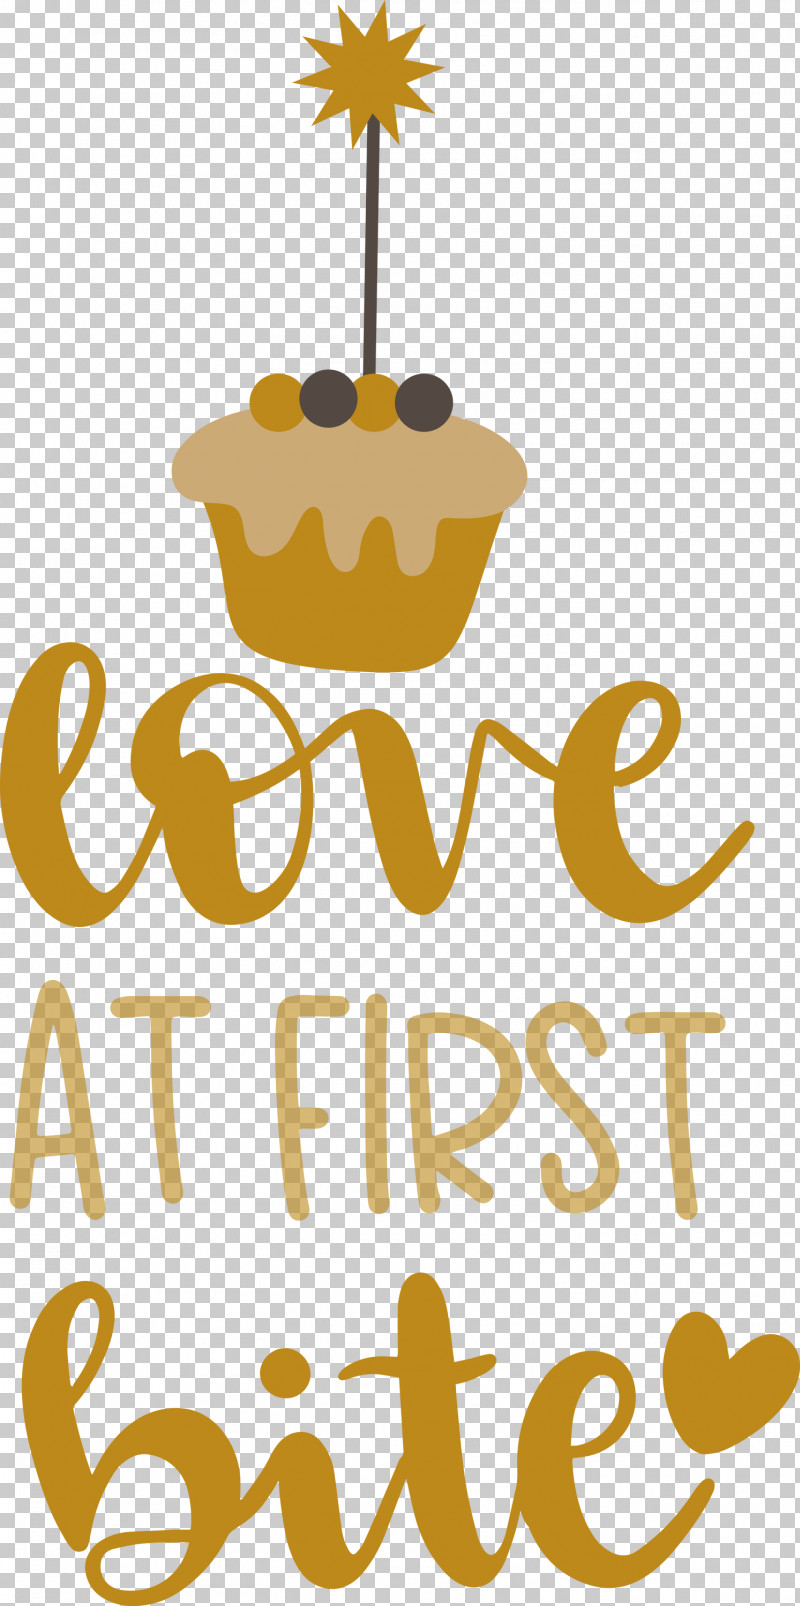 Love At First Bite Cooking Kitchen PNG, Clipart, Cooking, Cupcake, Food, Happiness, Kitchen Free PNG Download